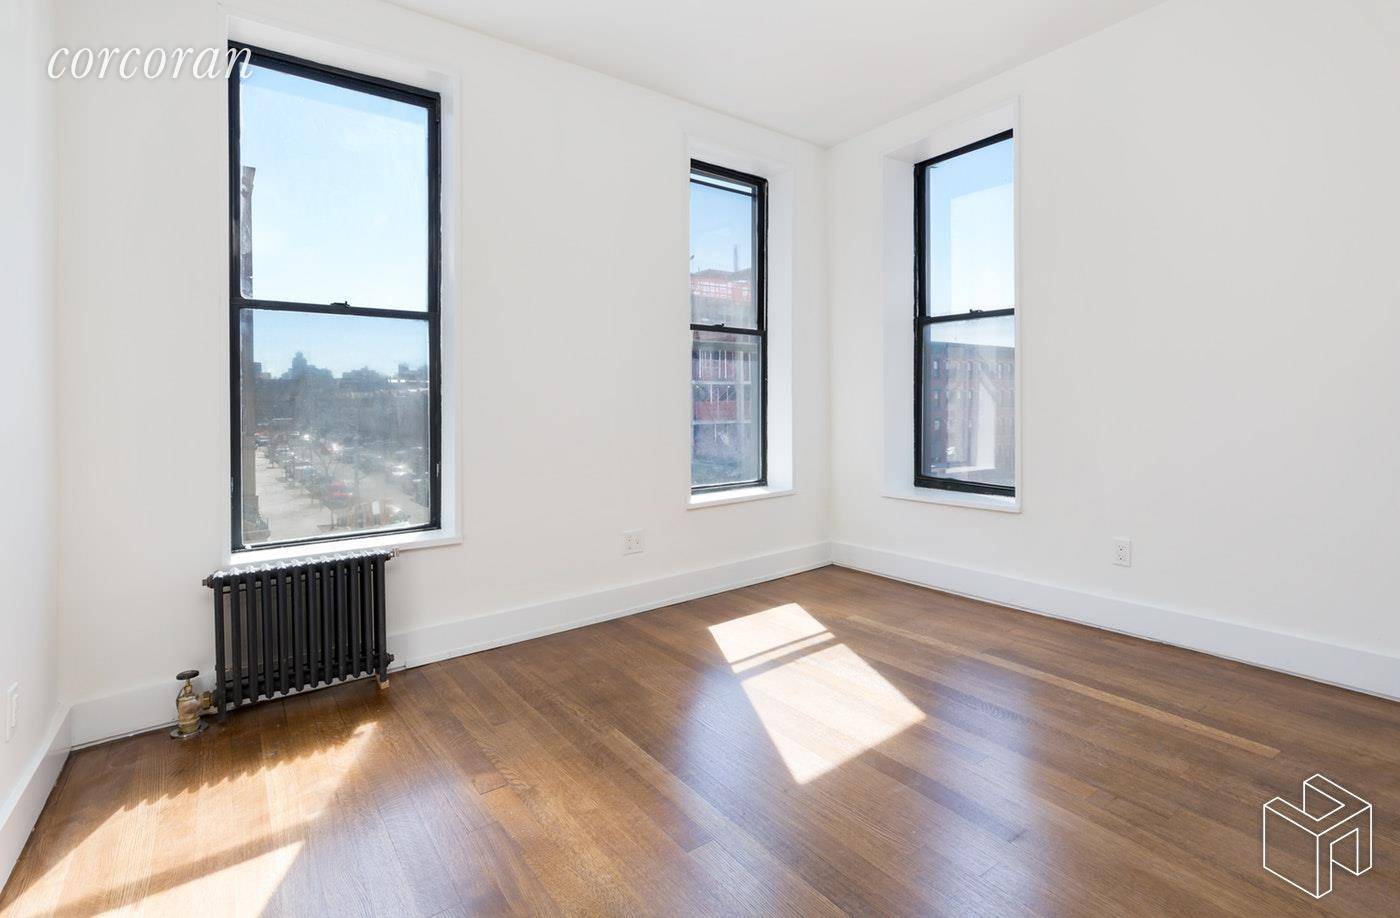 NO FEE amp ; 1 MONTH FREE Three bedroom two bathroom apartment for rent in Boerum Hill Park Slope Gowanus.